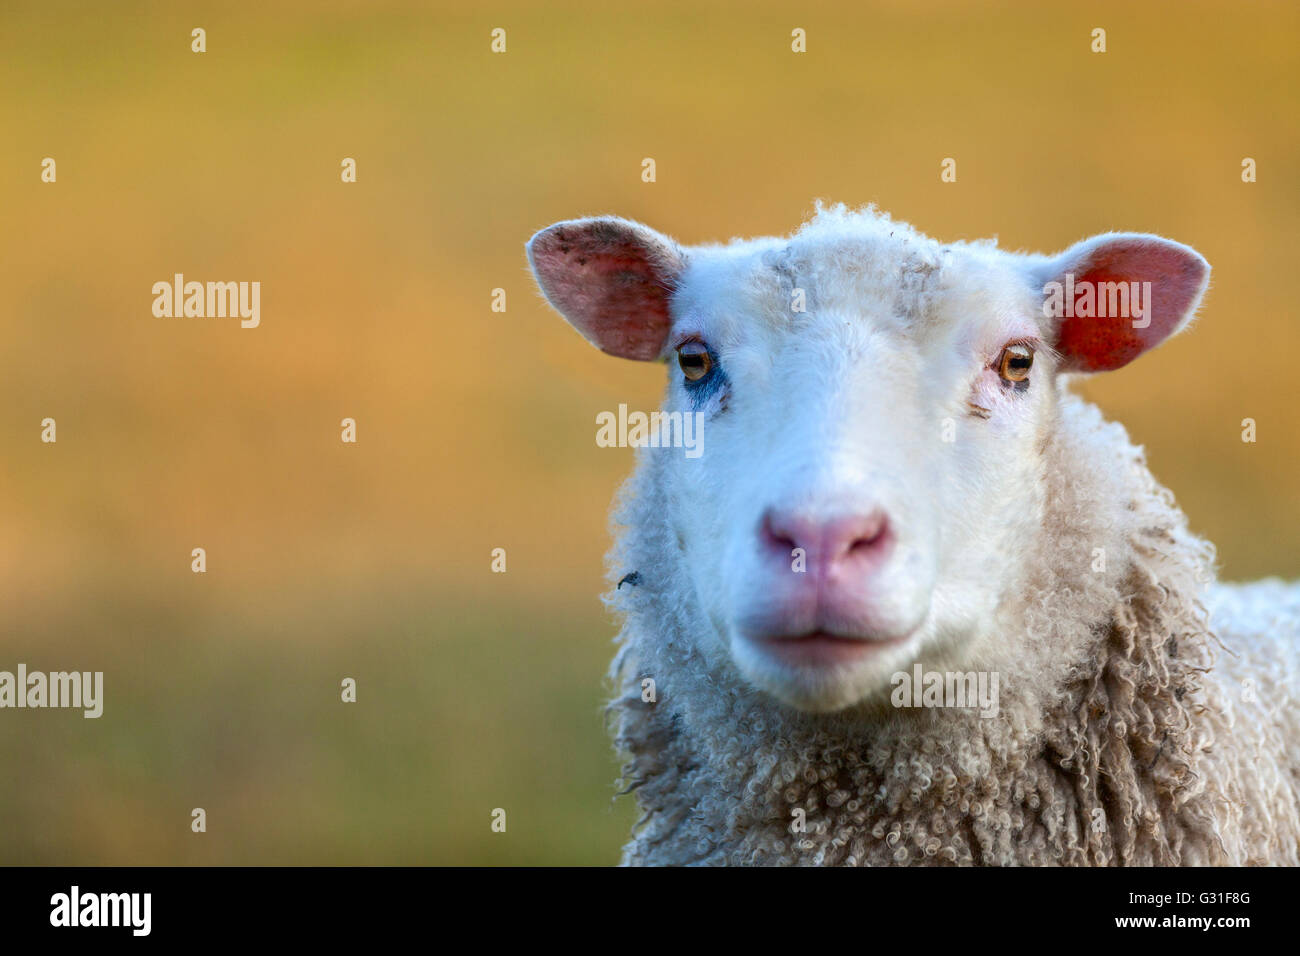 A portrait of a white sheep taken early in the morning. Stock Photo